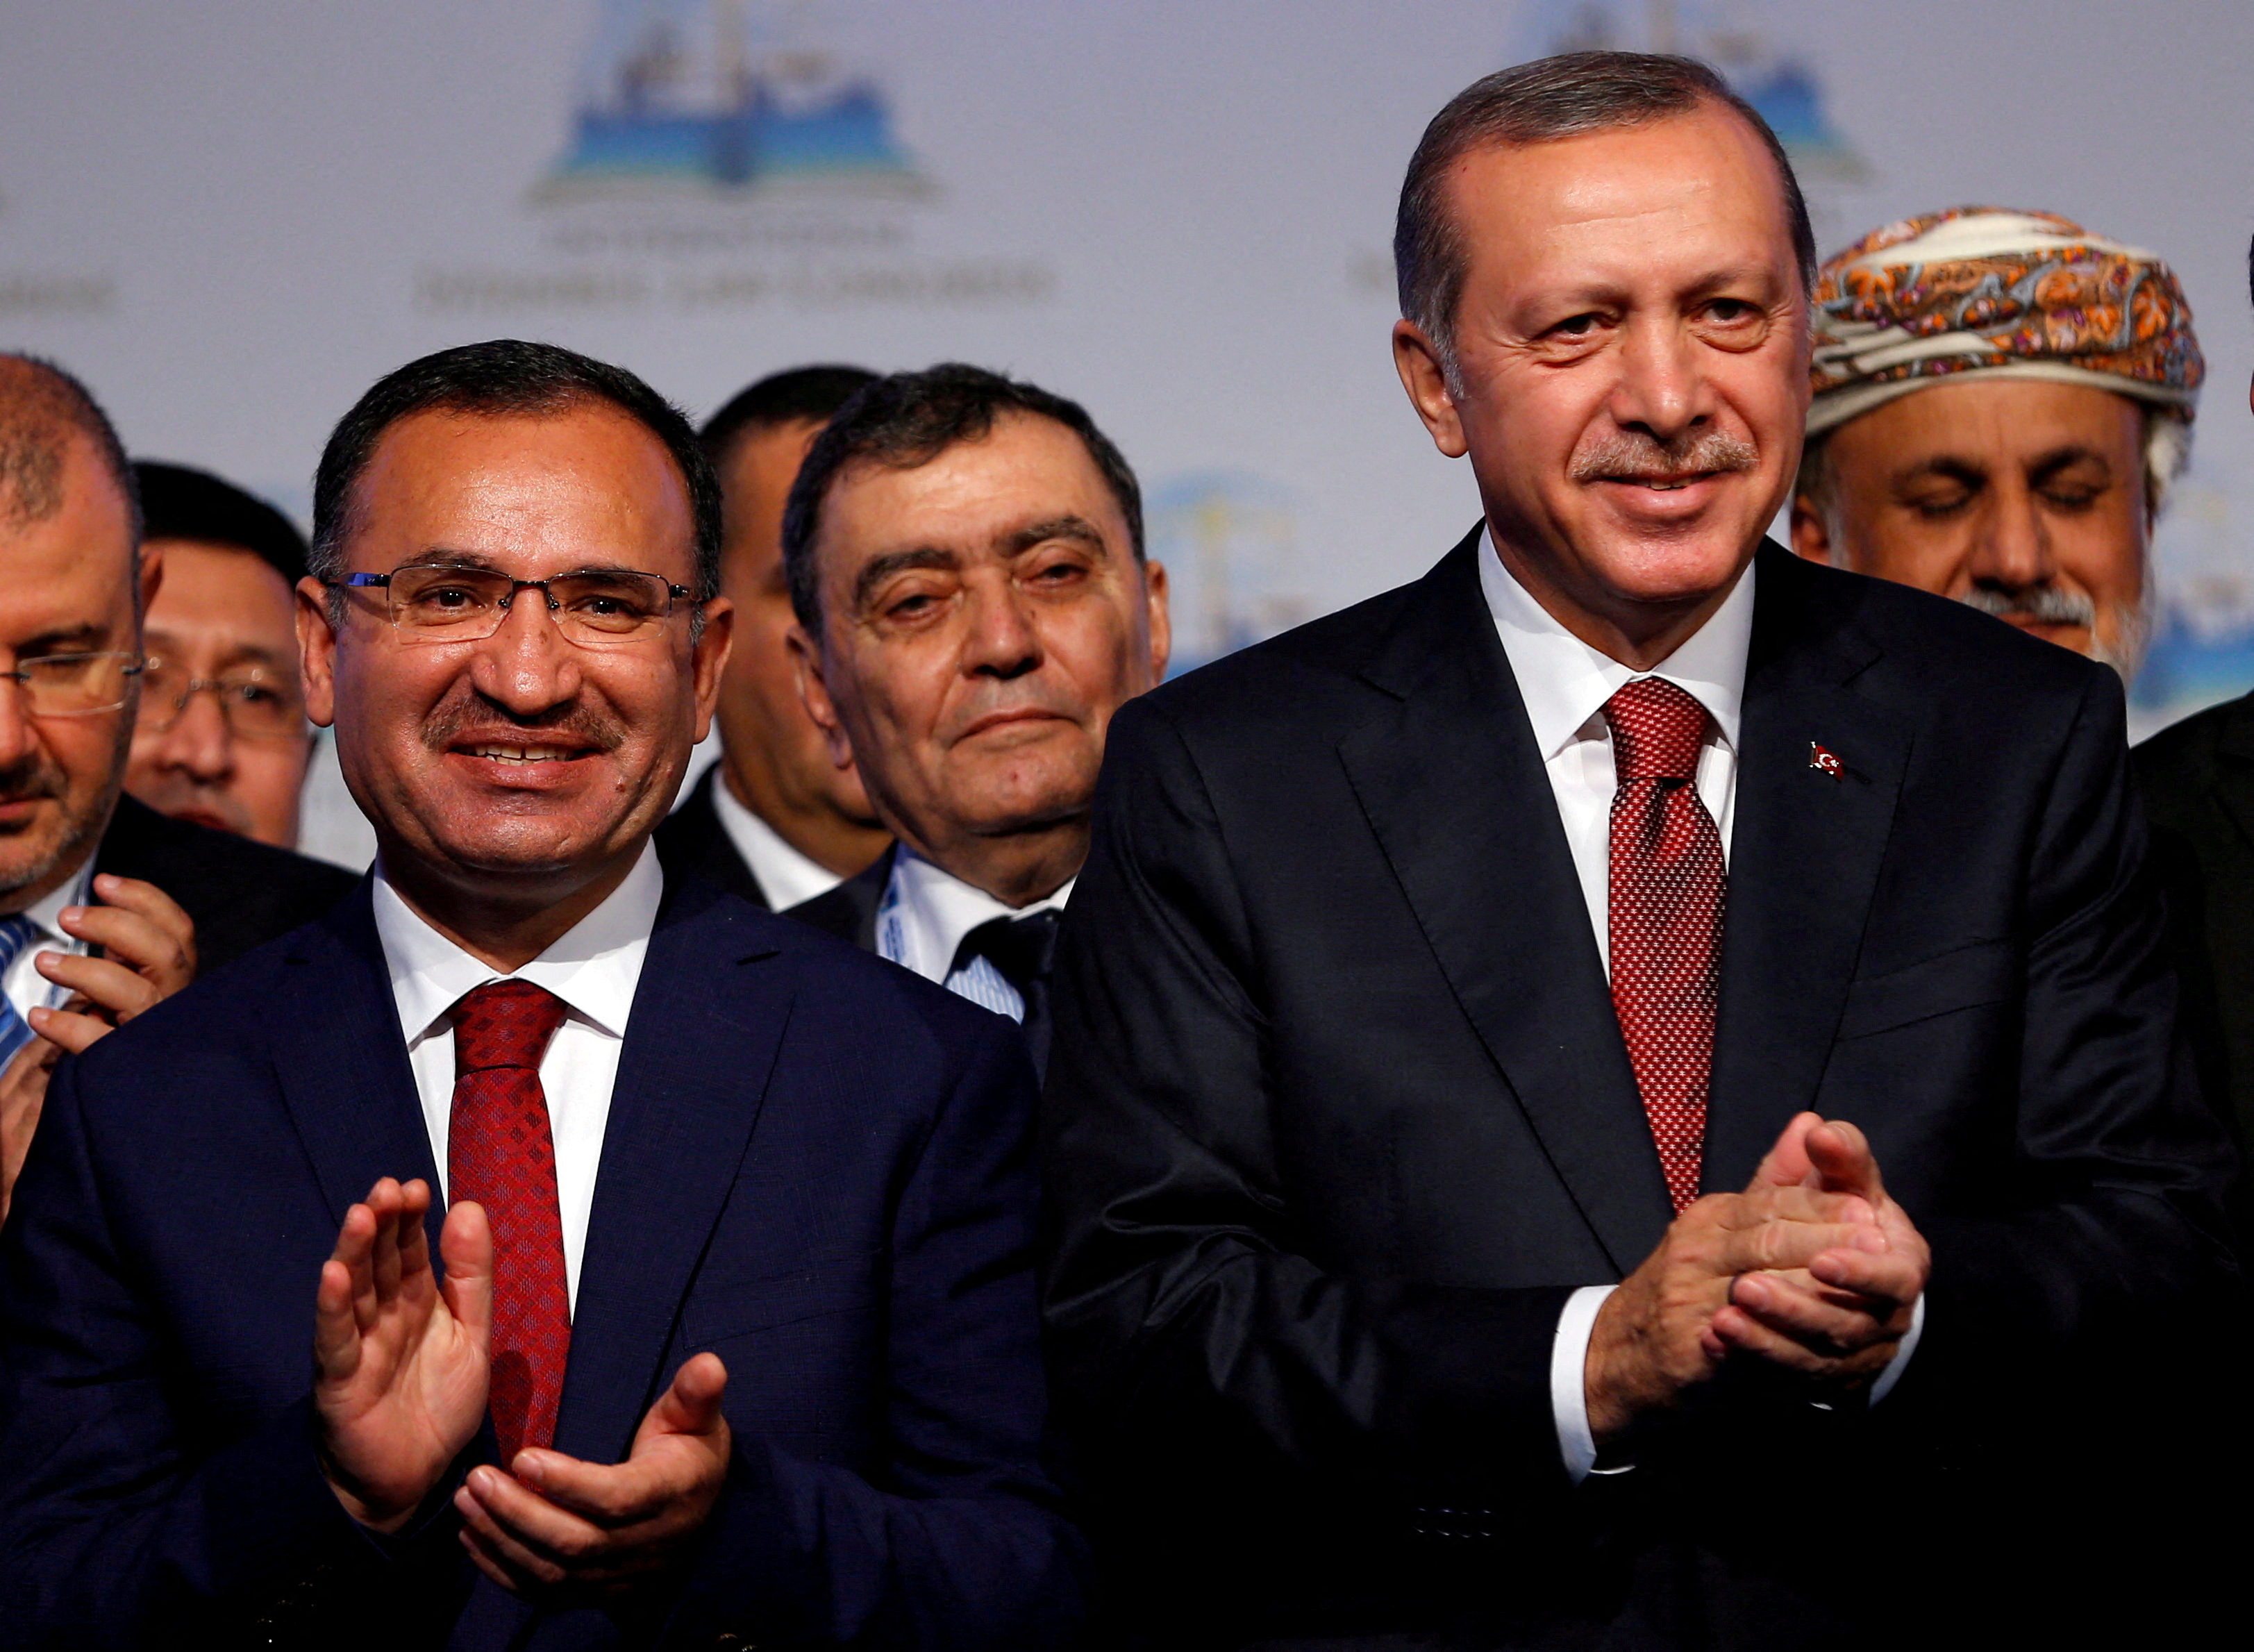 Turkish President Erdogan is pictured with Turkish Justice Minister Bozdag during the International Istanbul Law Congress in Istanbul